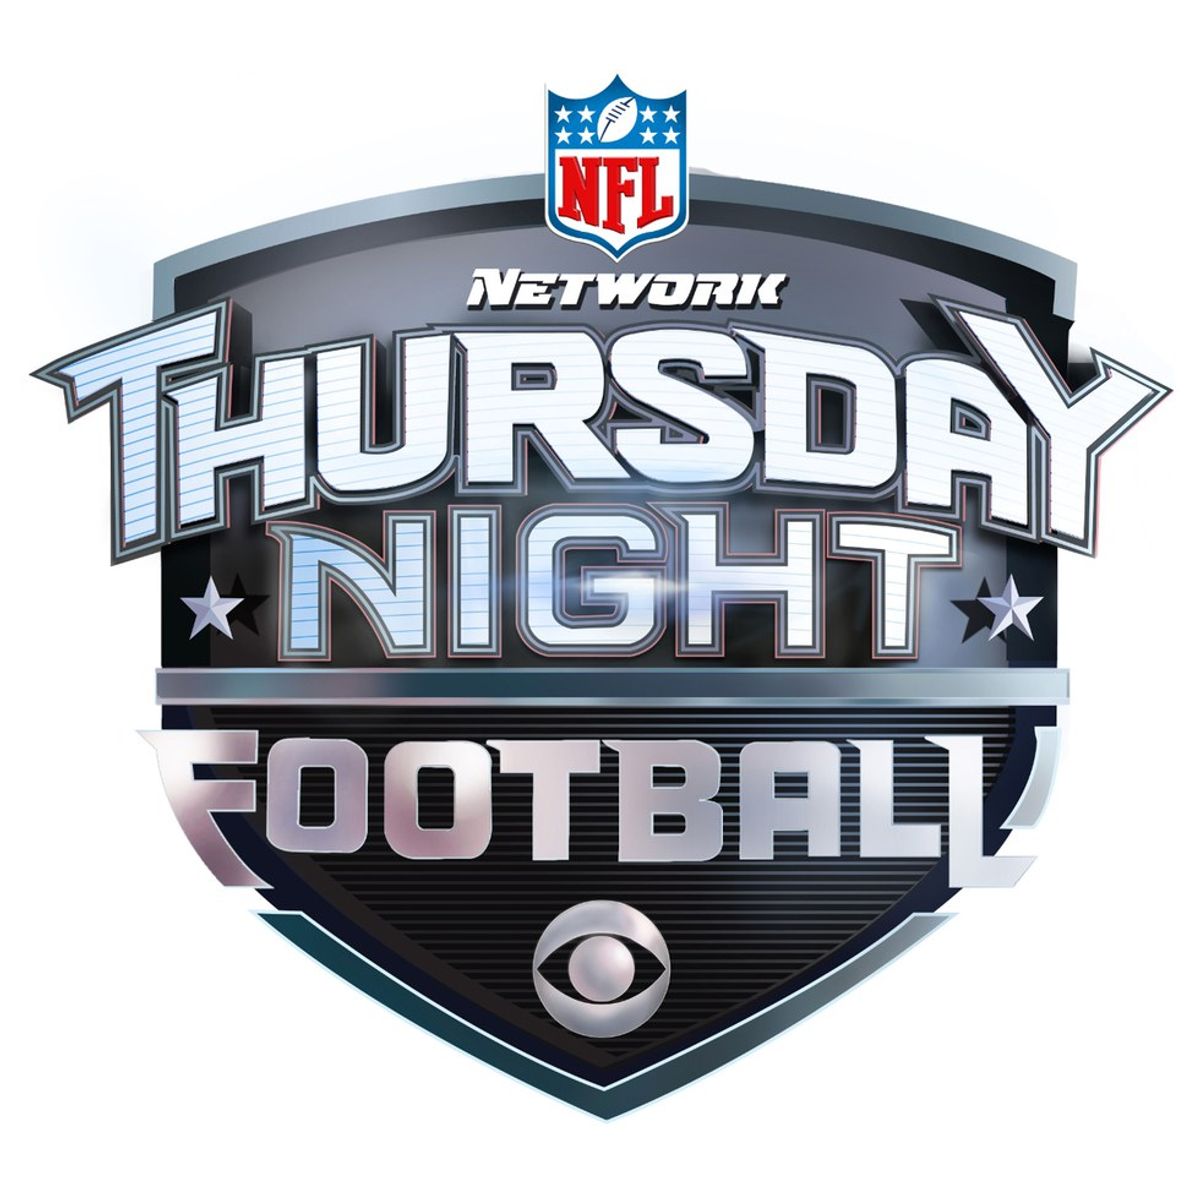 Why Thursday Night Football Games Should Be Banned Or Limited